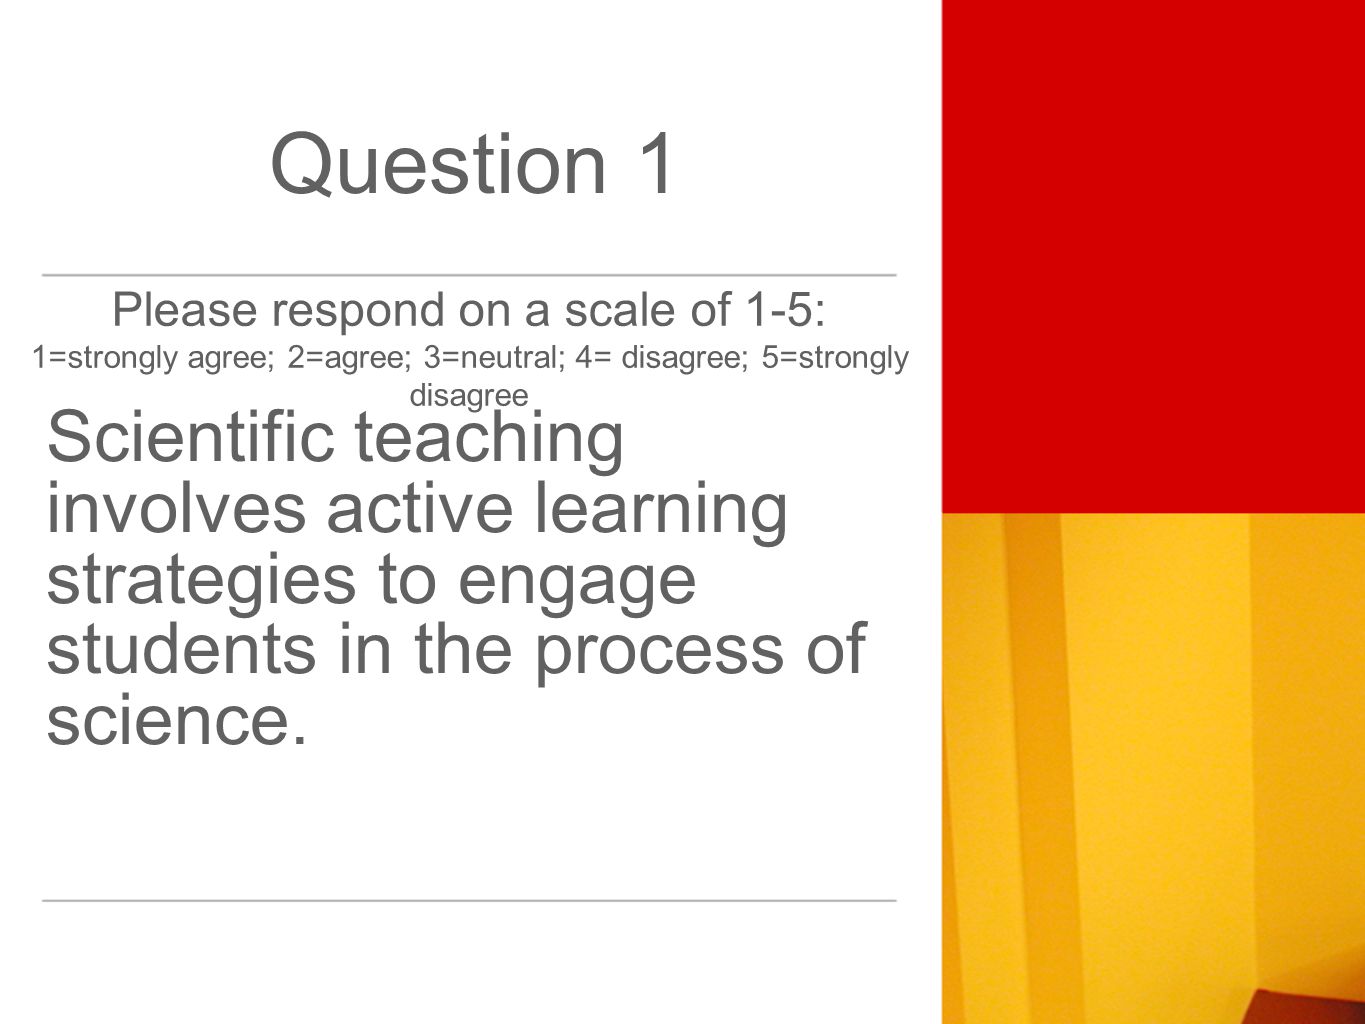 Question 1 Scientific teaching involves active learning strategies to engage students in the process of science.